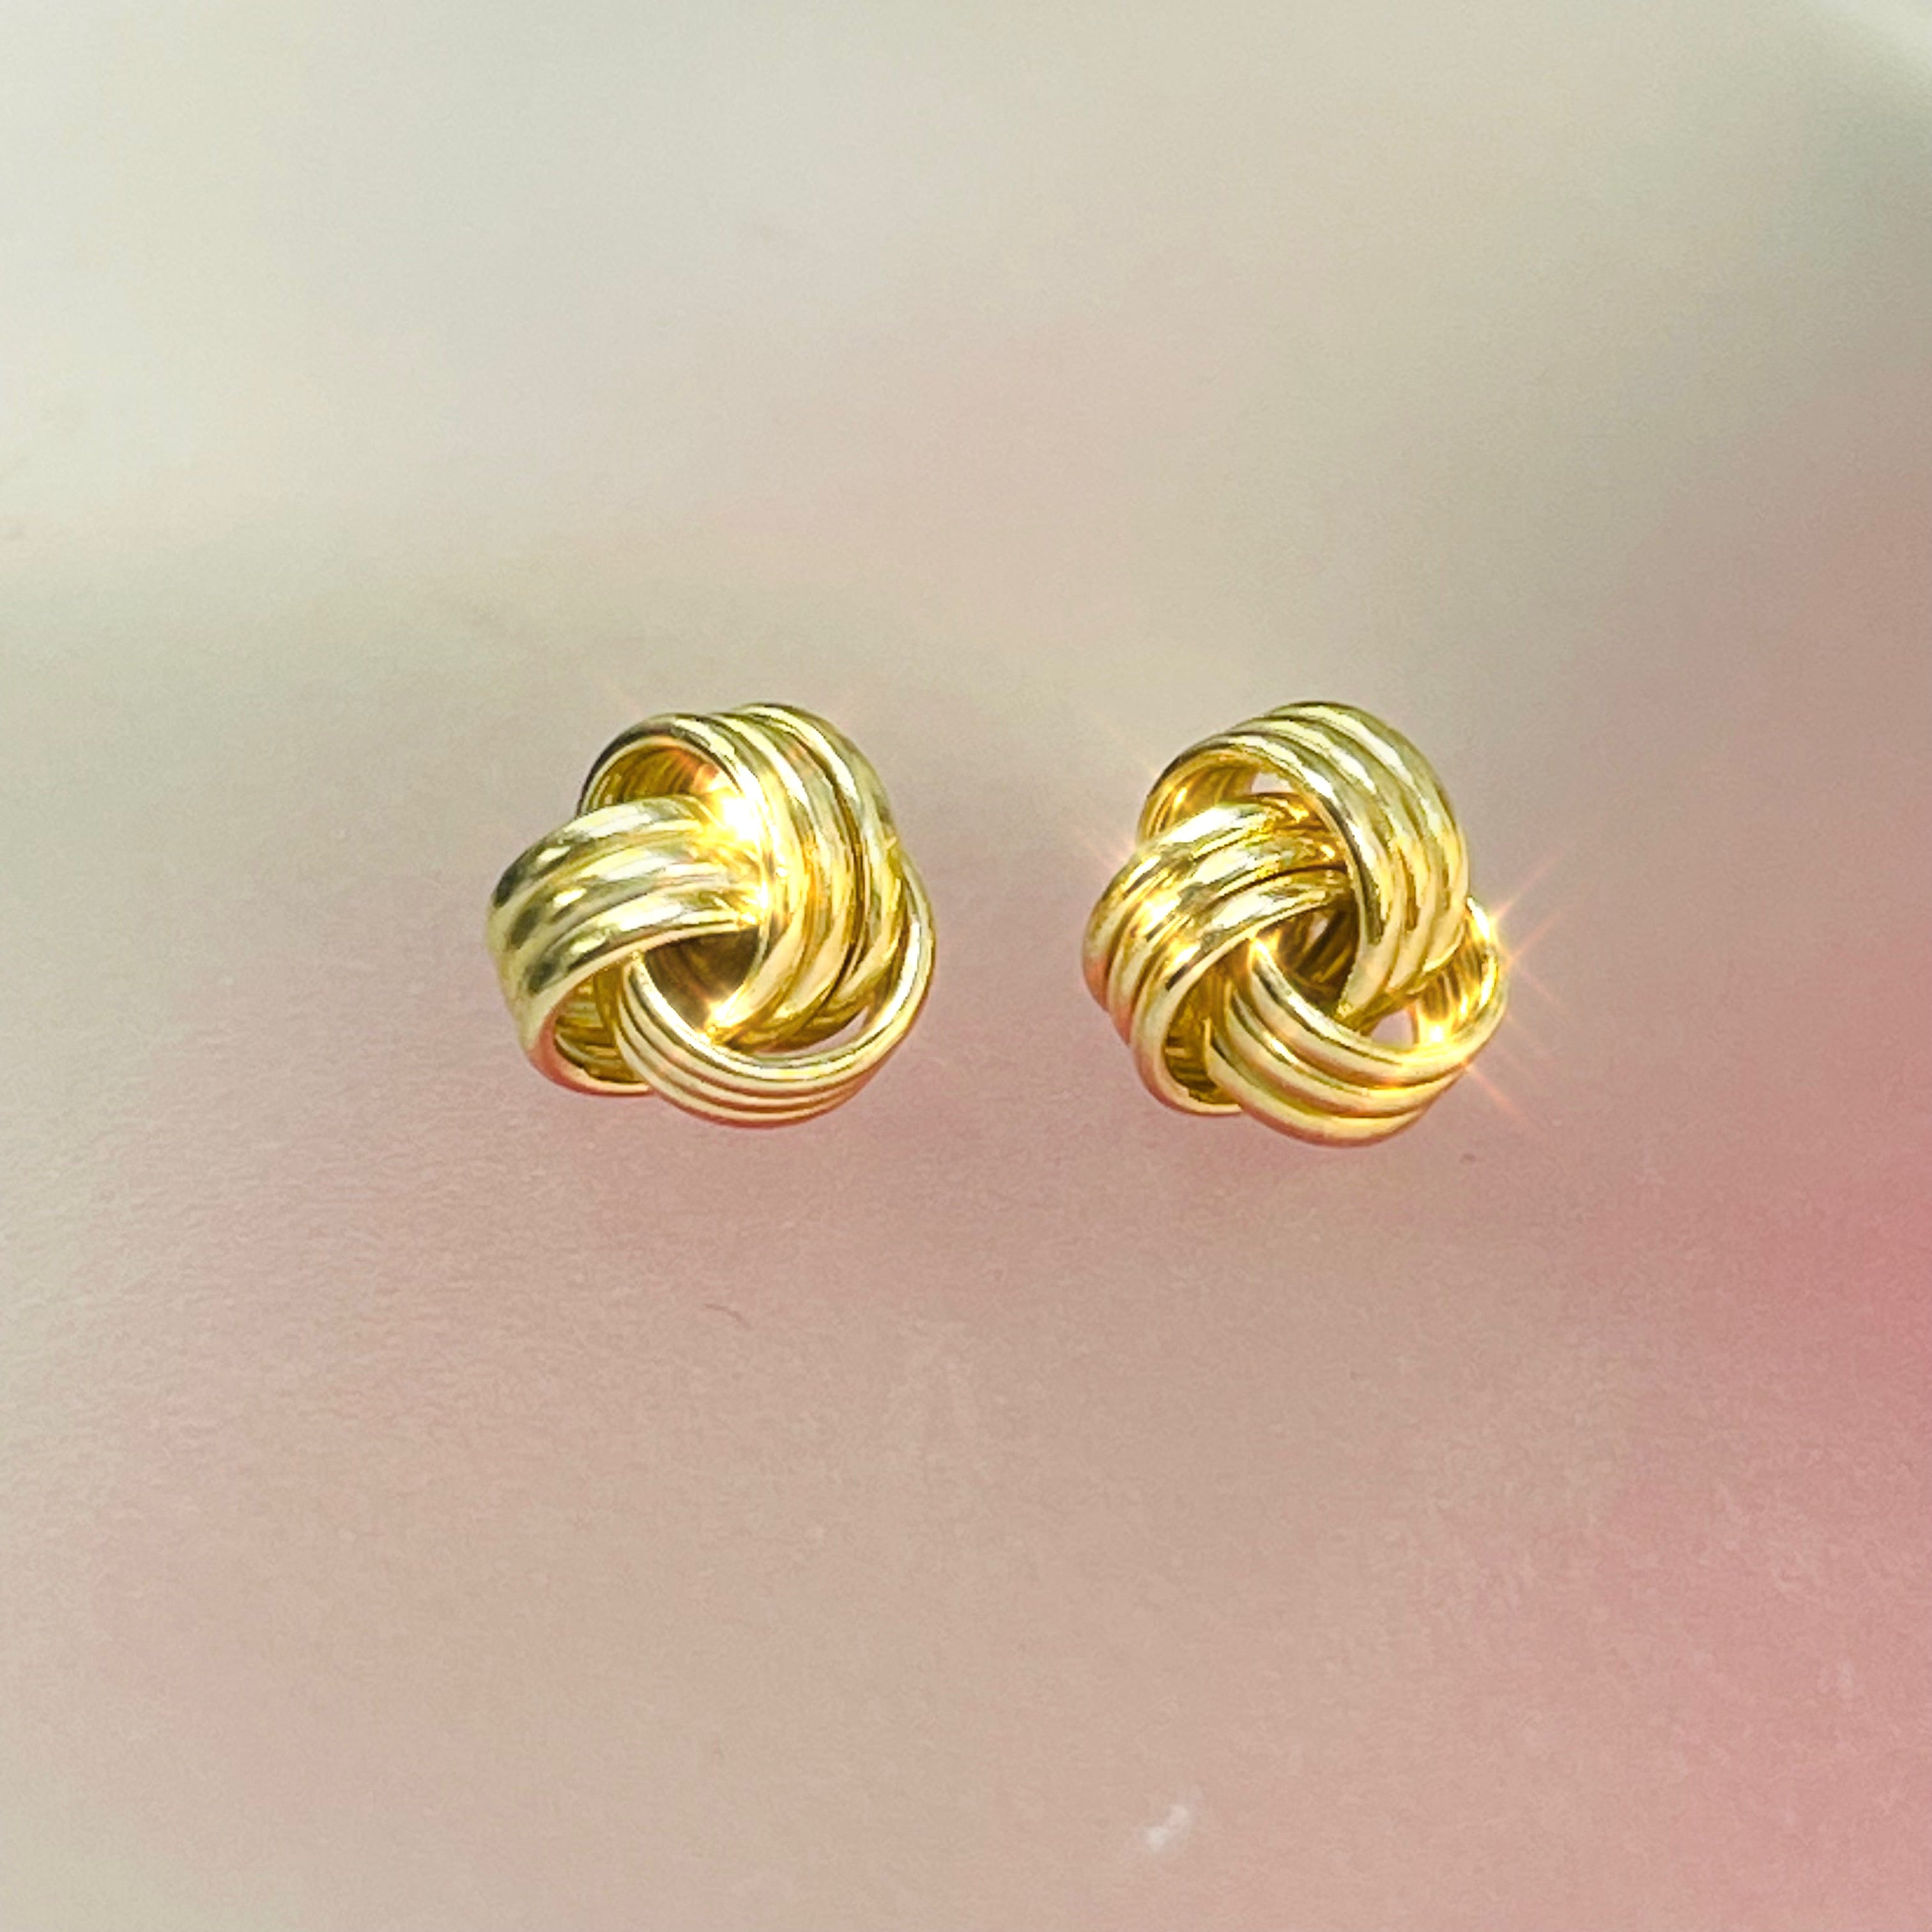 Classic 7mm  Dimensional Knot 14K Yellow Gold Earring Studs